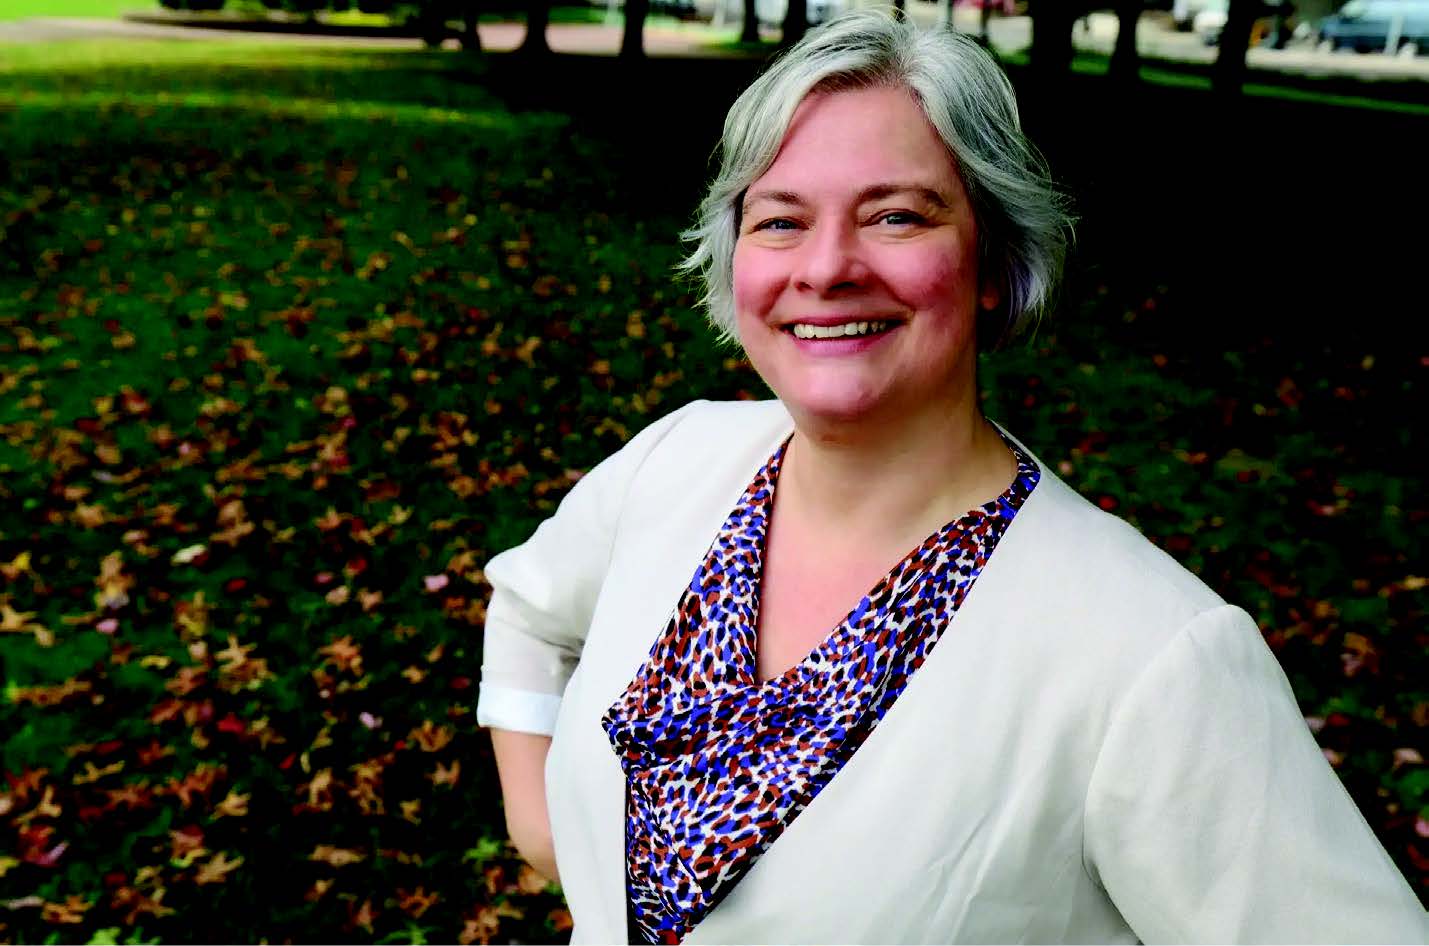 Picture of PROTEC17 member Sarah Silkie for her campaign. Sarah has short hair and is wearing a purple blouse under a white/cream blazer. She is smiling and standing on the grass with some foliage in the background.